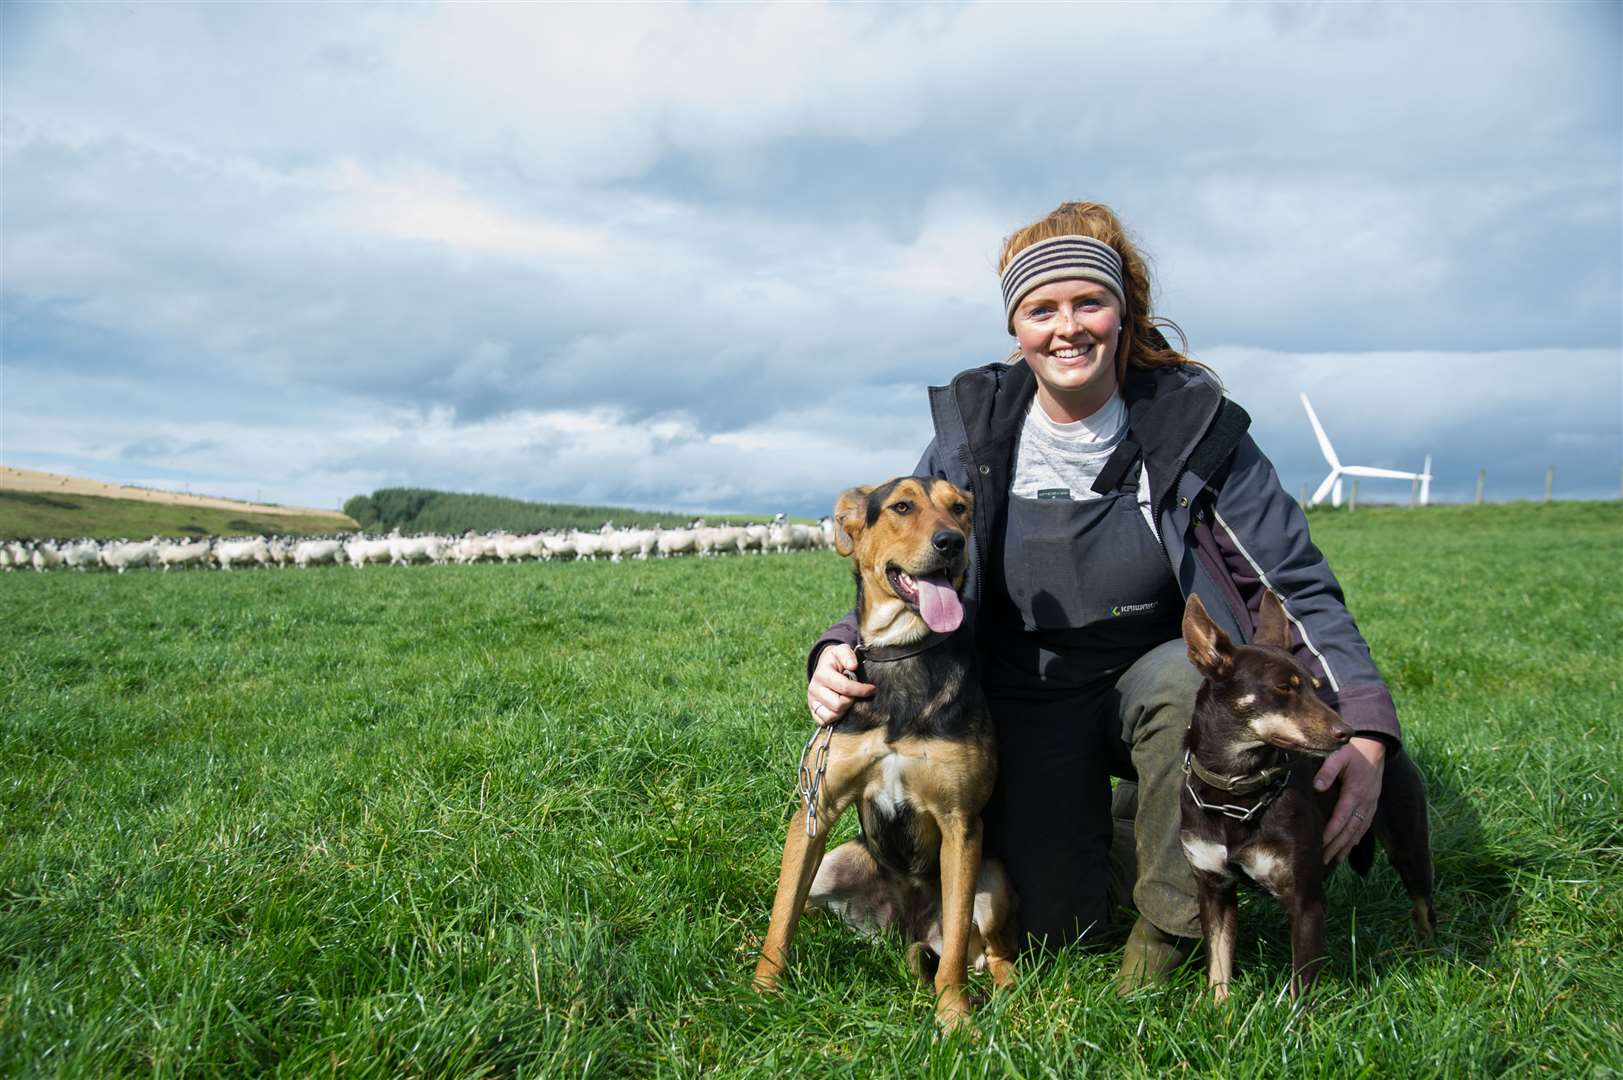 Nicola Wordie who has been nominated for Countryfile Young Countryside Champion with her two sheepdogs. Picture: Becky Saunderson.